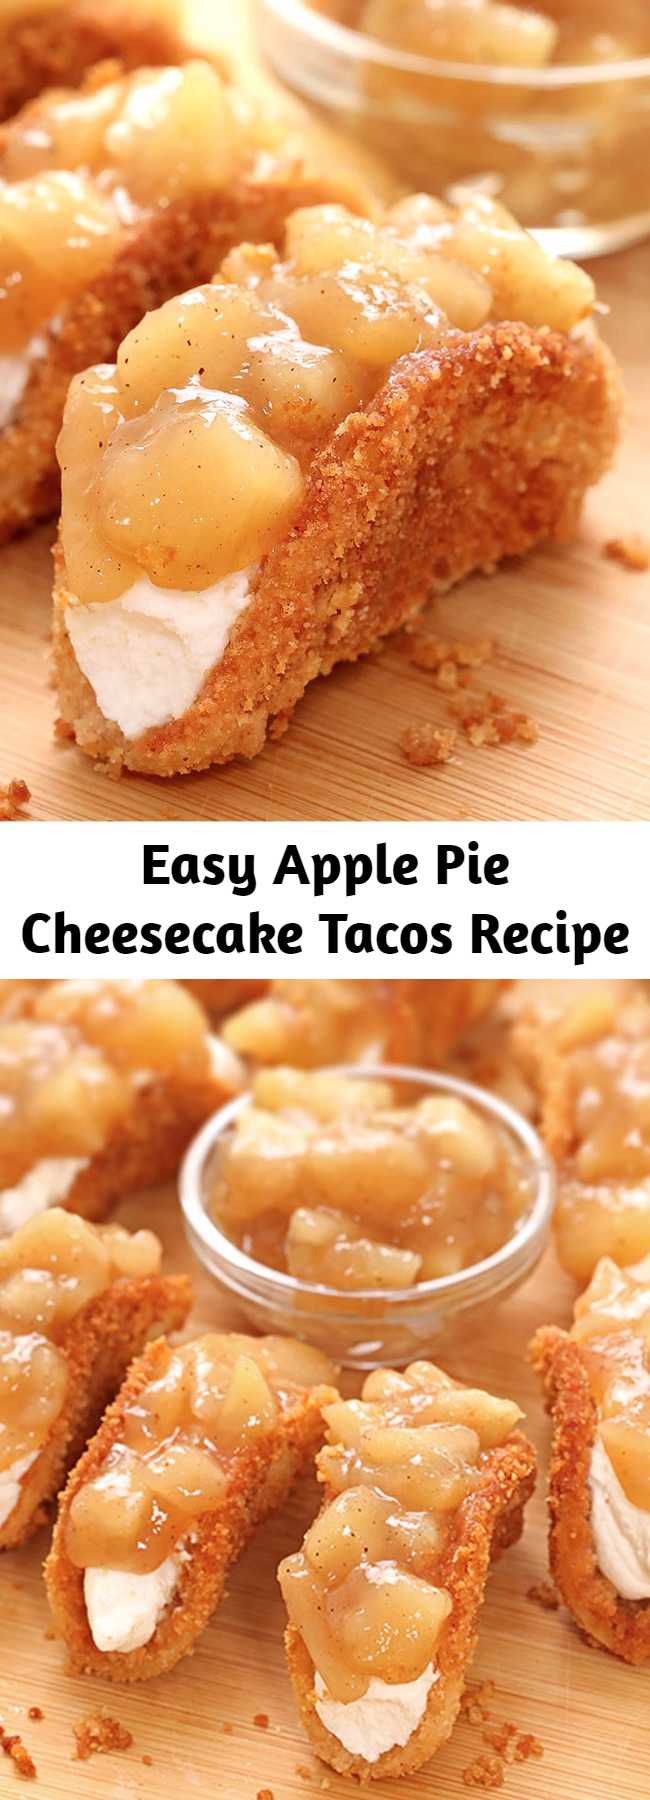 Easy Apple Pie Cheesecake Tacos Recipe - A new fall favorite in your home and they couldn’t be easier. Crunchy baked tortilla shells, easy cheesecake filling and homemade apple pie topping are simply perfect. You’ll be enjoying this awesome dessert in about 30 minutes.